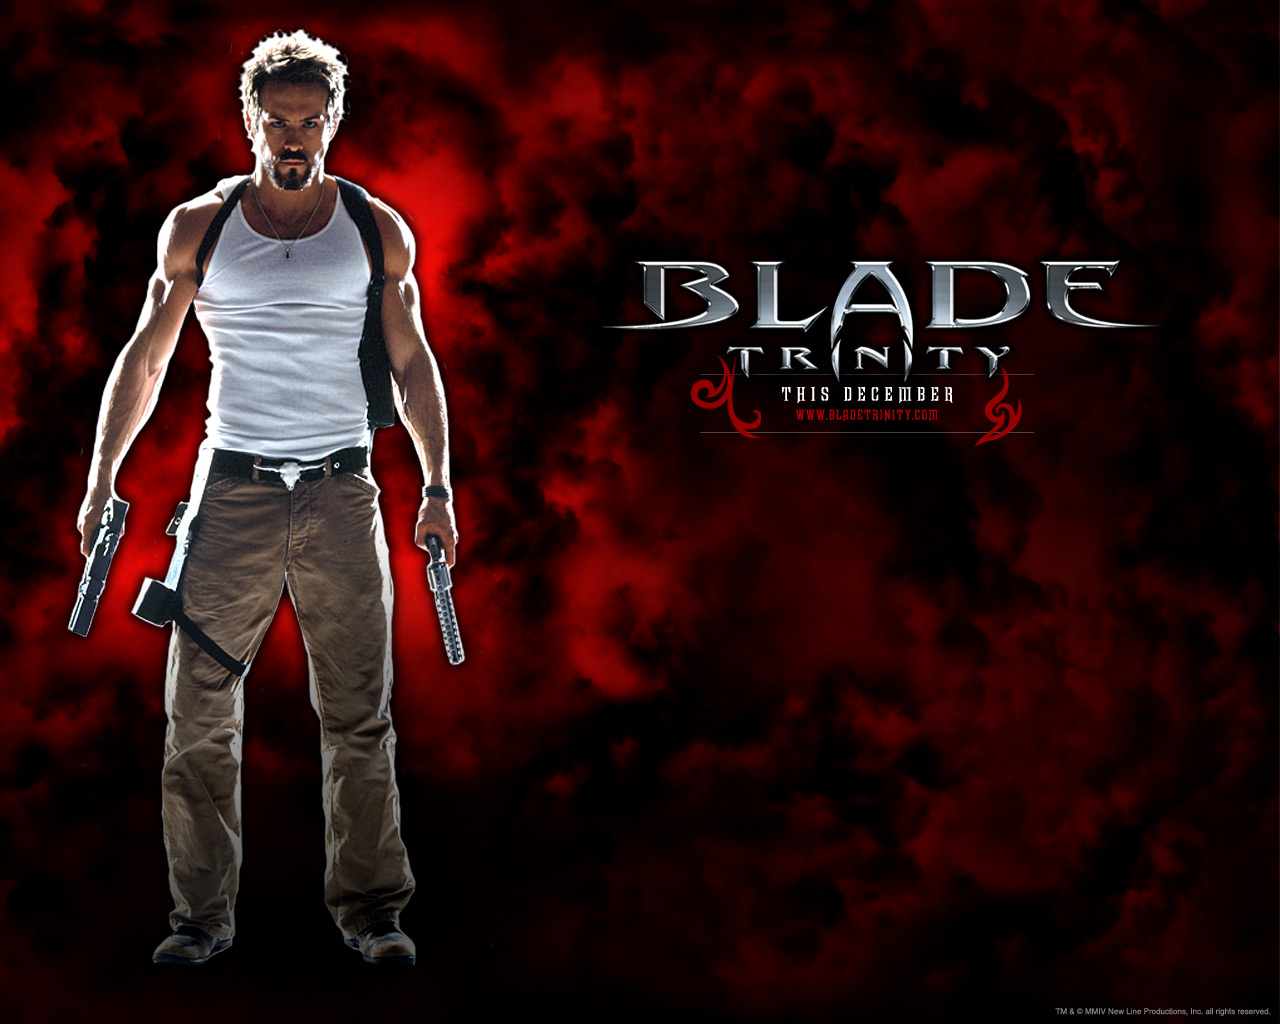 Download full size Blade Trinity wallpaper / Movies / 1280x1024